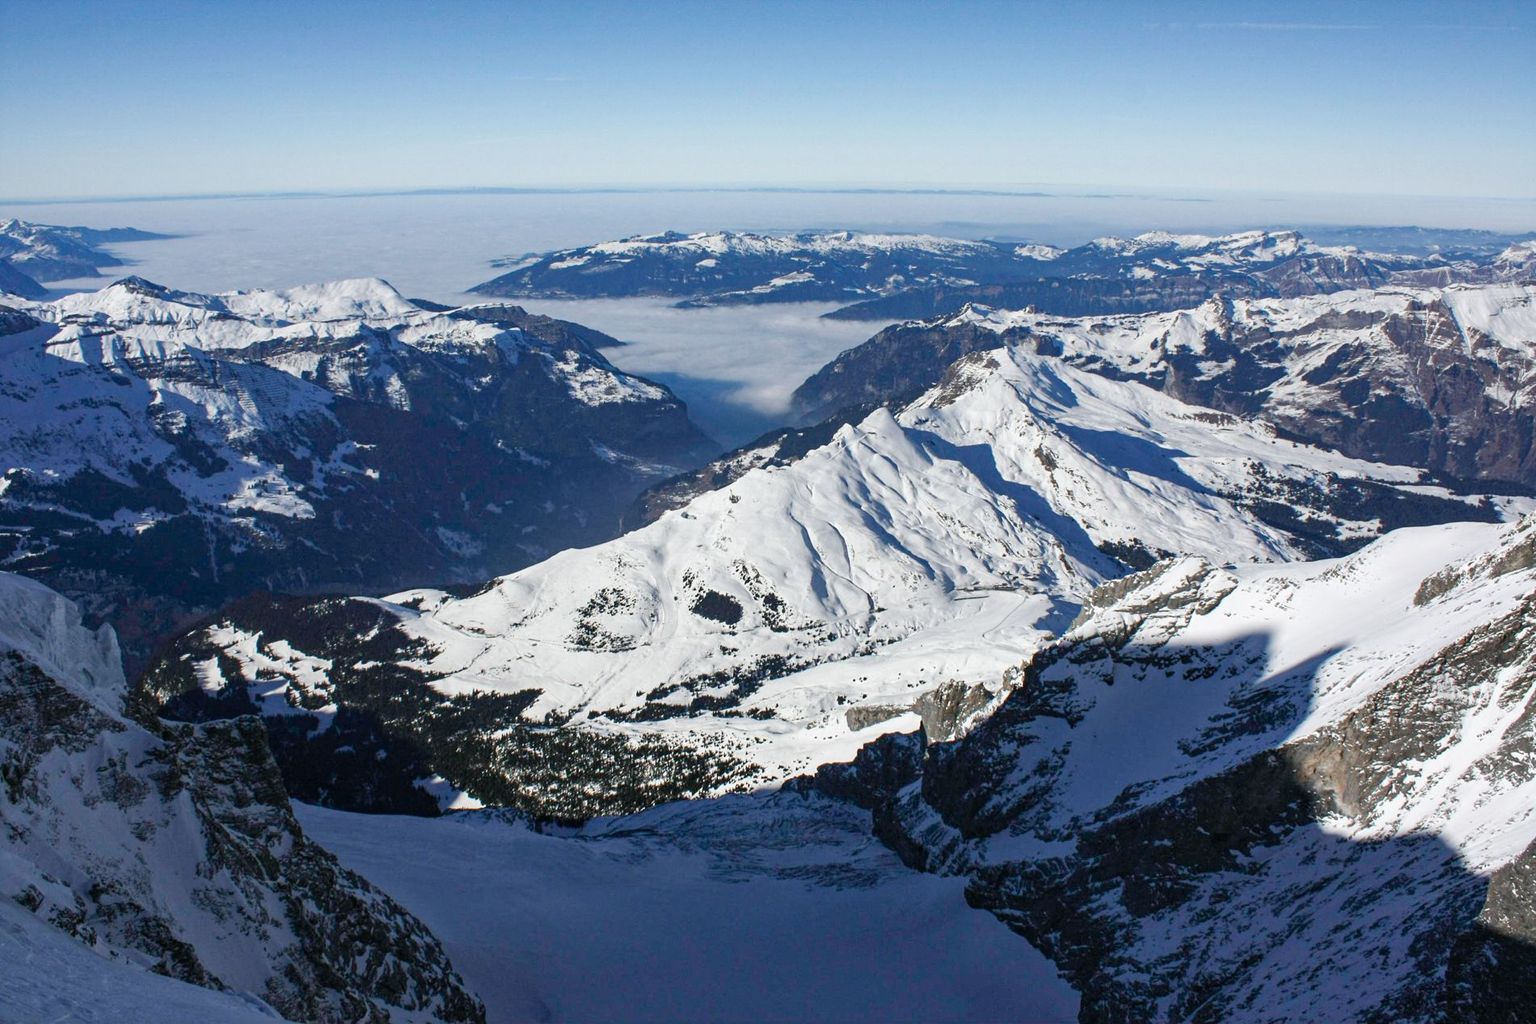 NW view from Jungfraujoch on the Bernese Oberland (BE)